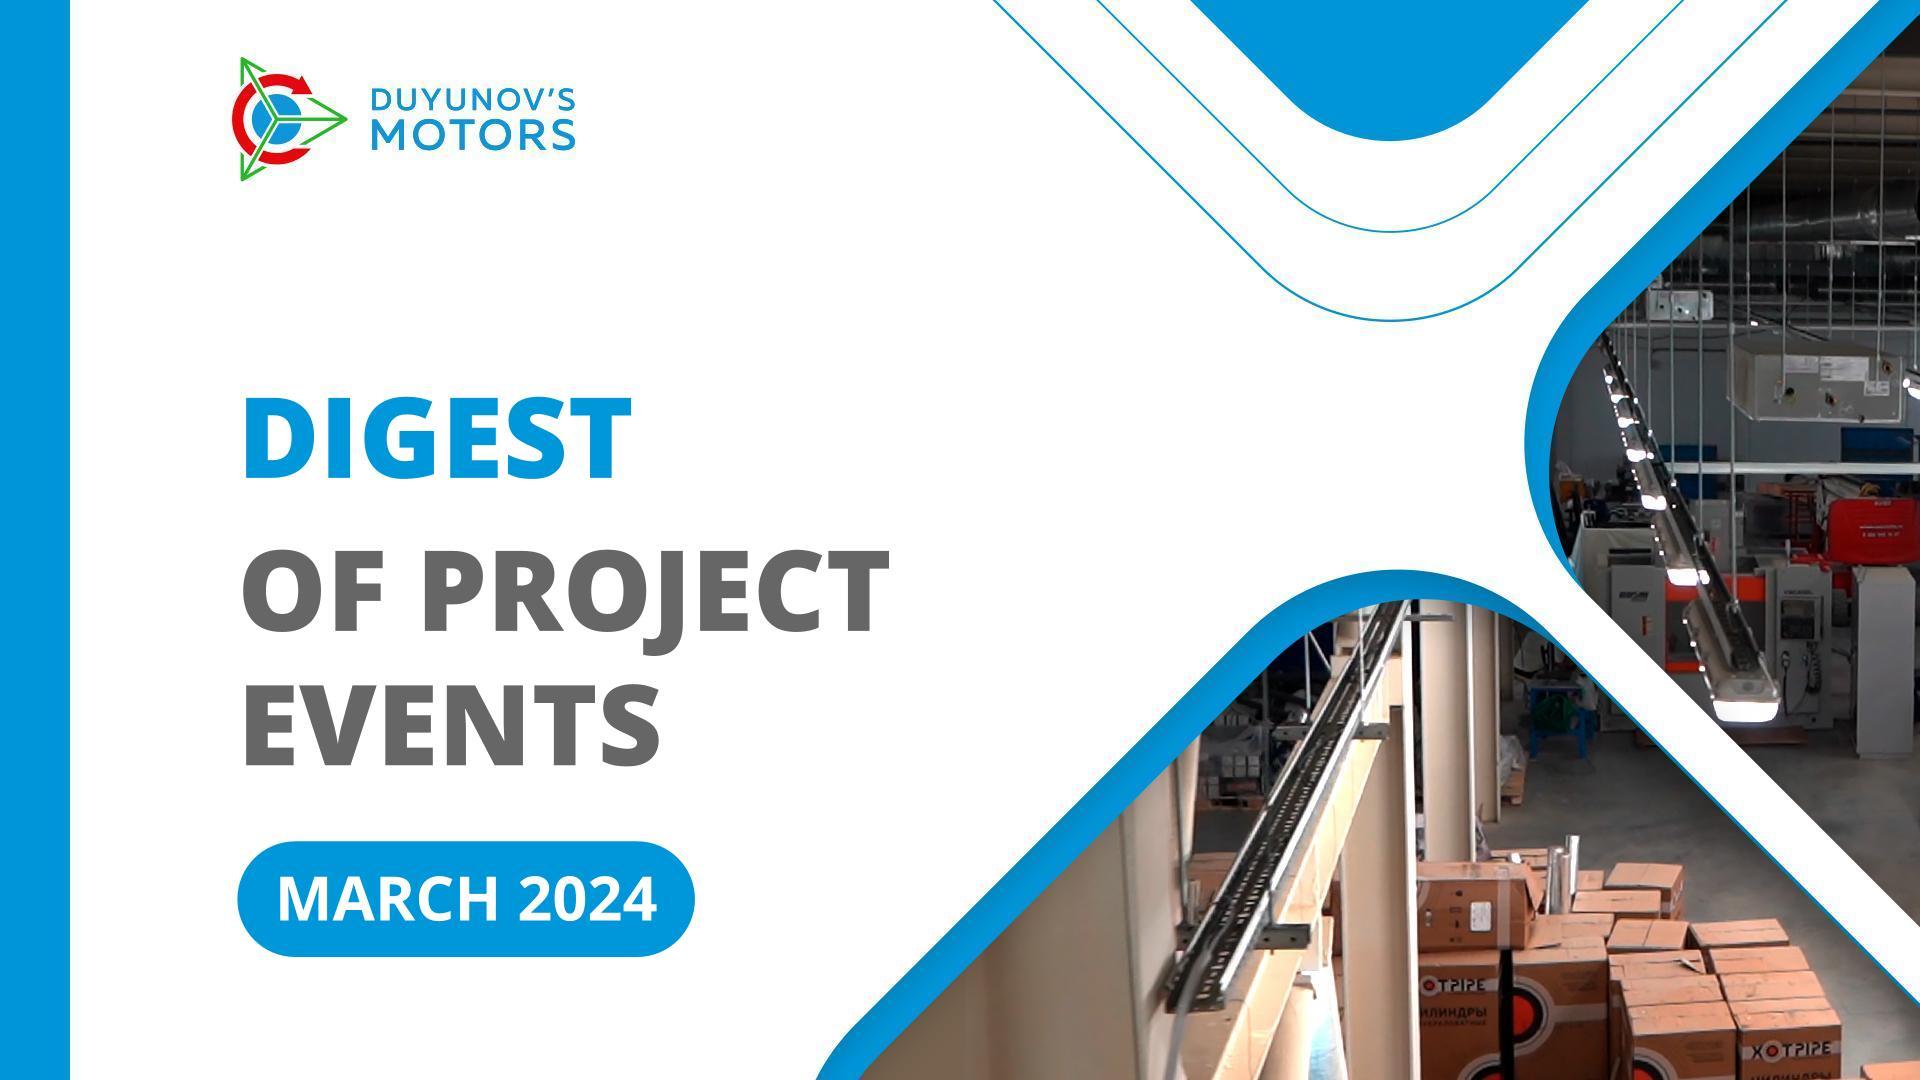 Key project events in March